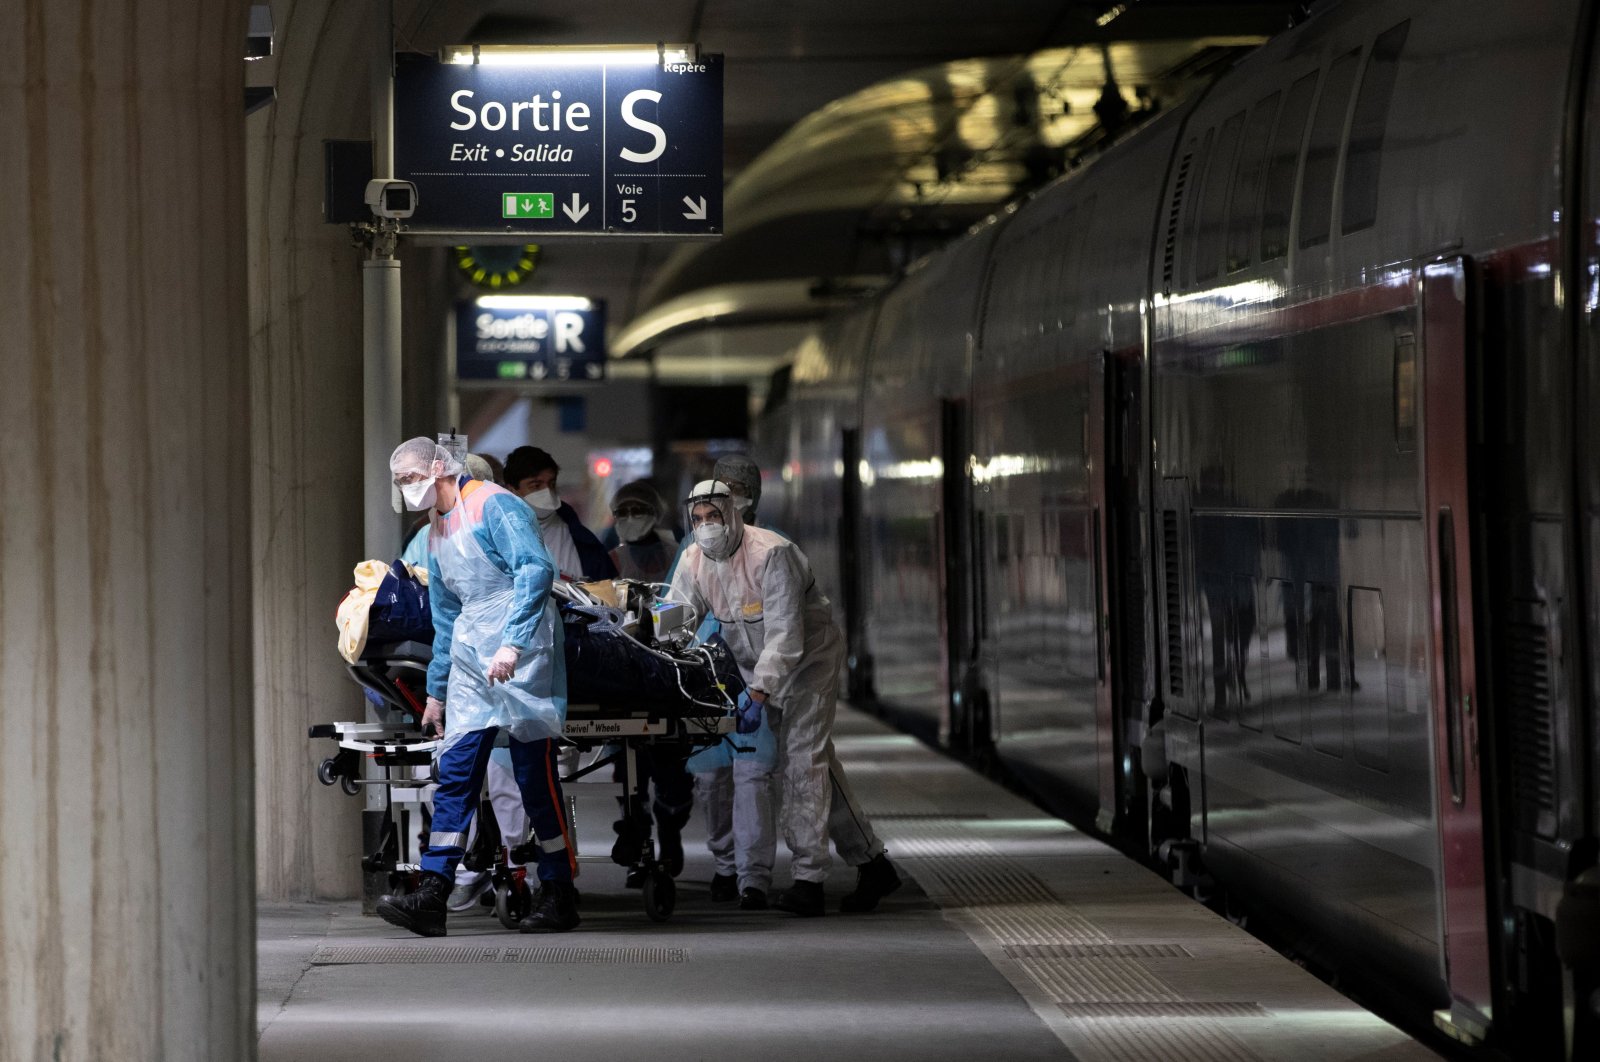 Medical staff carry a patient infected with the COVID-19 into a medicalised TGV high speed train at the Gare d'Austerlitz train station on April 1, 2020 in Paris, France (EPA Photo)